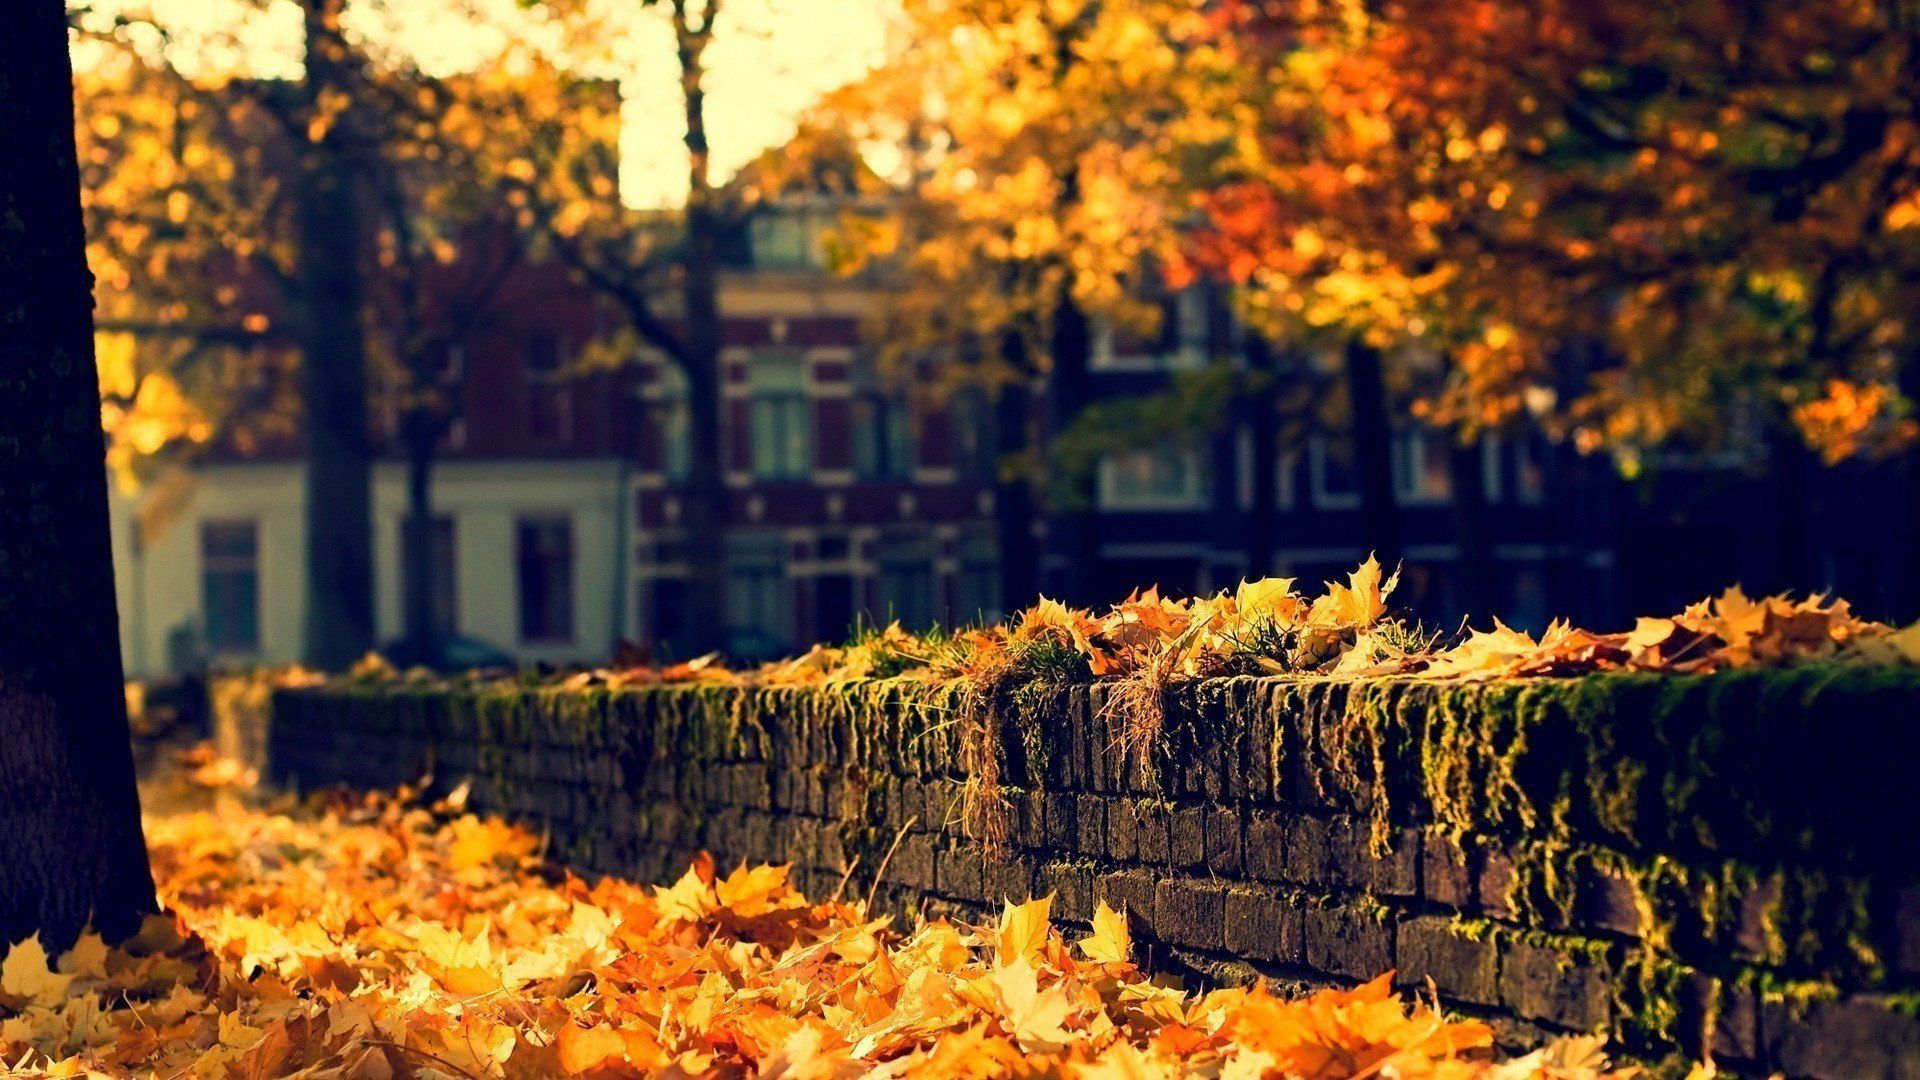 Small Town Wallpaper Small Town Image and Wallpaper for Mac. Desktop wallpaper fall, Aesthetic wallpaper, Fall picture nature